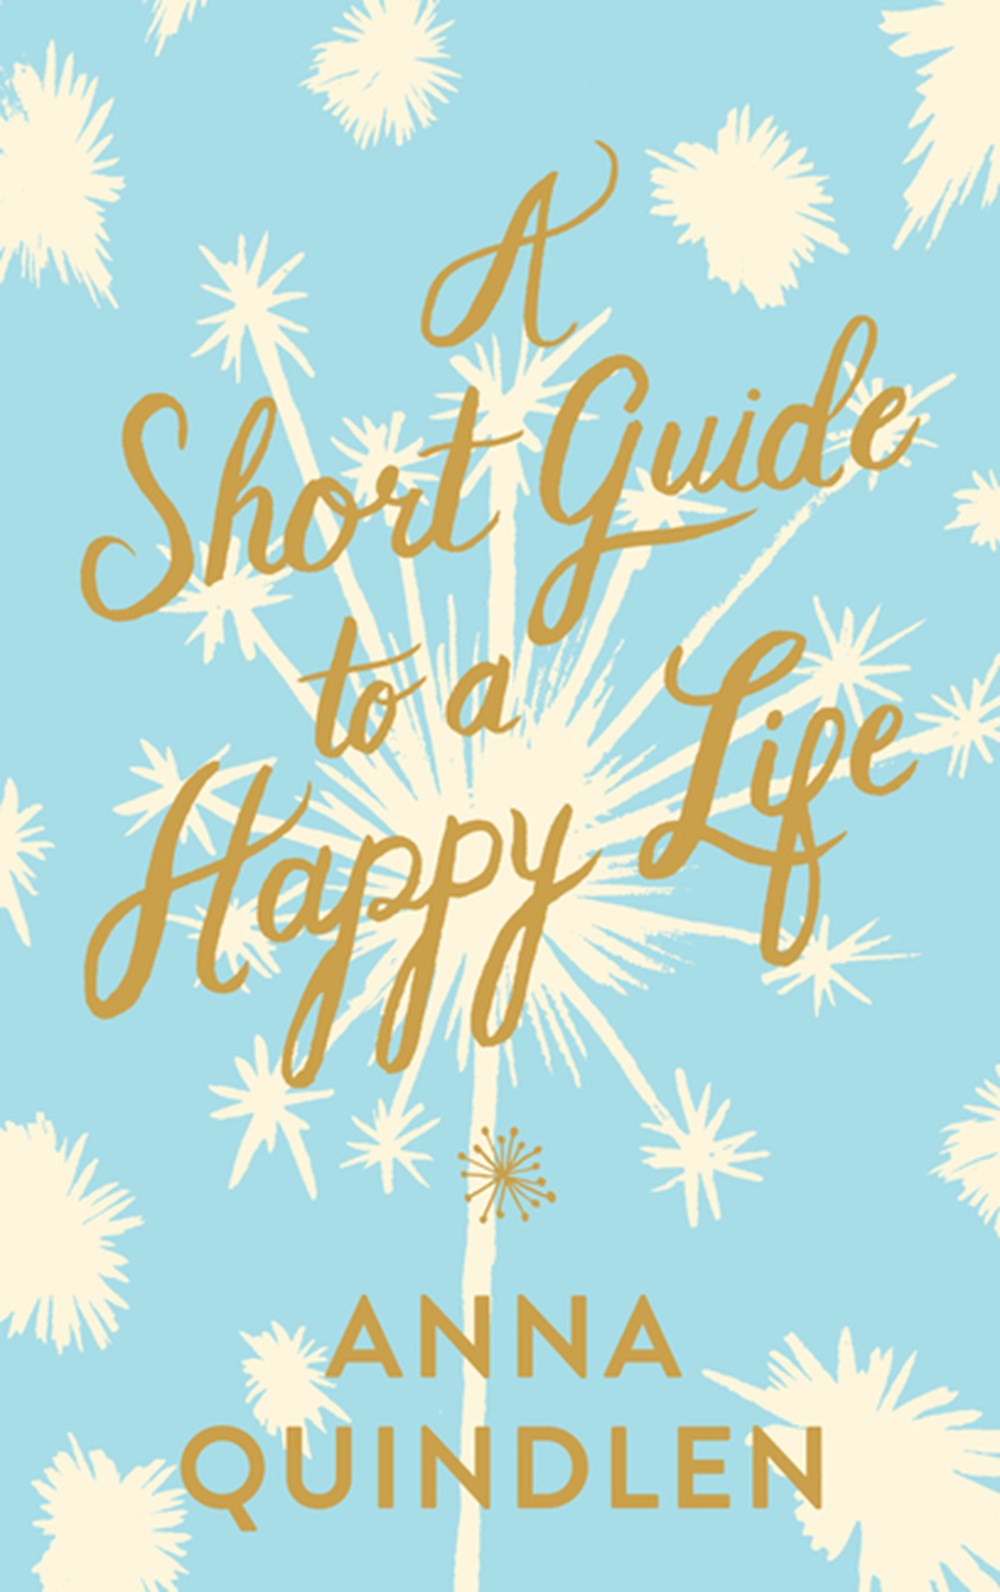 Short Guide to a Happy Life